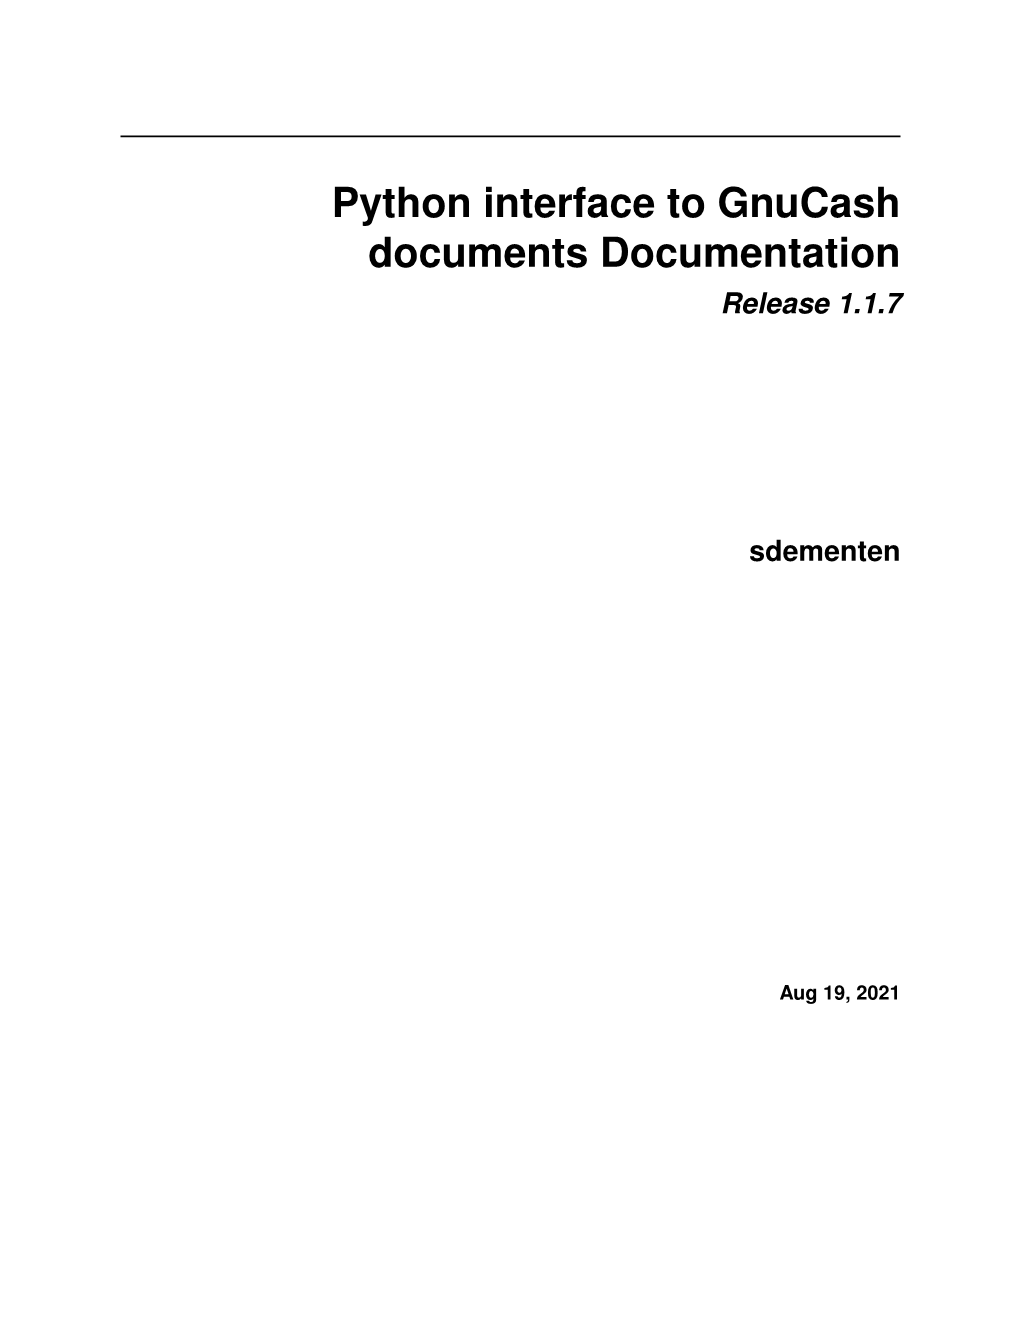 Python Interface to Gnucash Documents Documentation Release 1.1.7